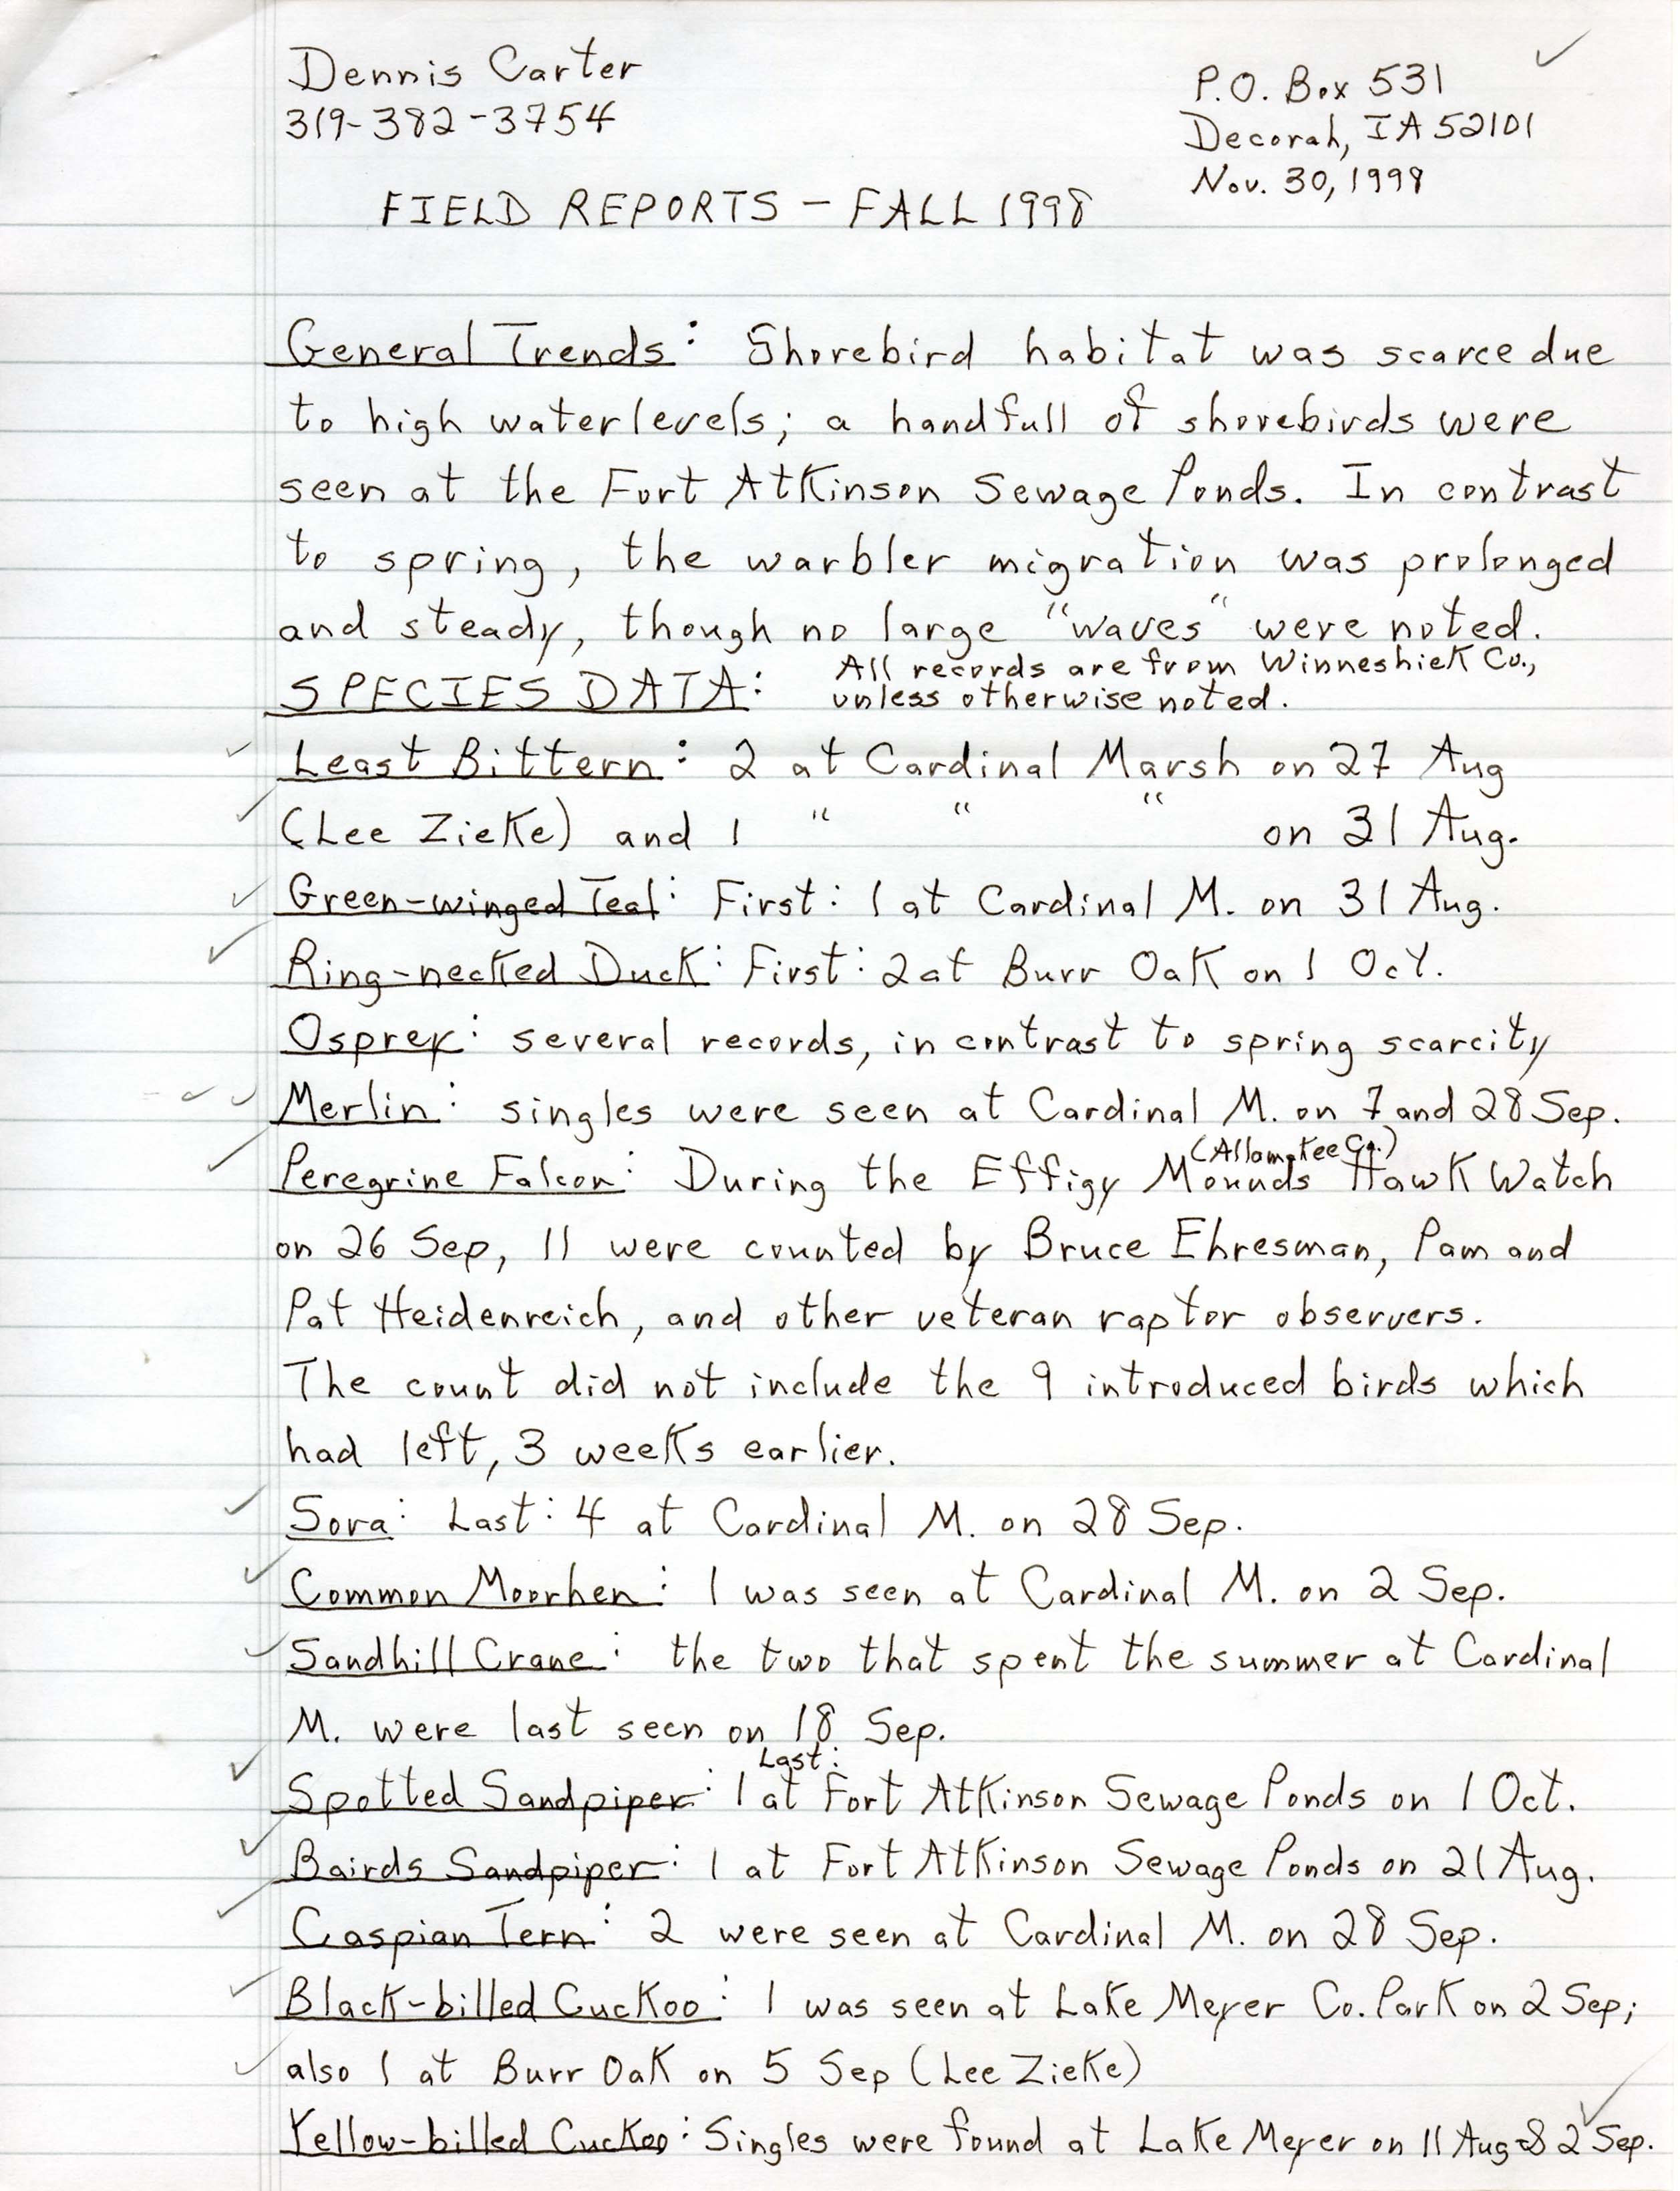 Field notes contributed by Dennis L. Carter, November 30, 1998